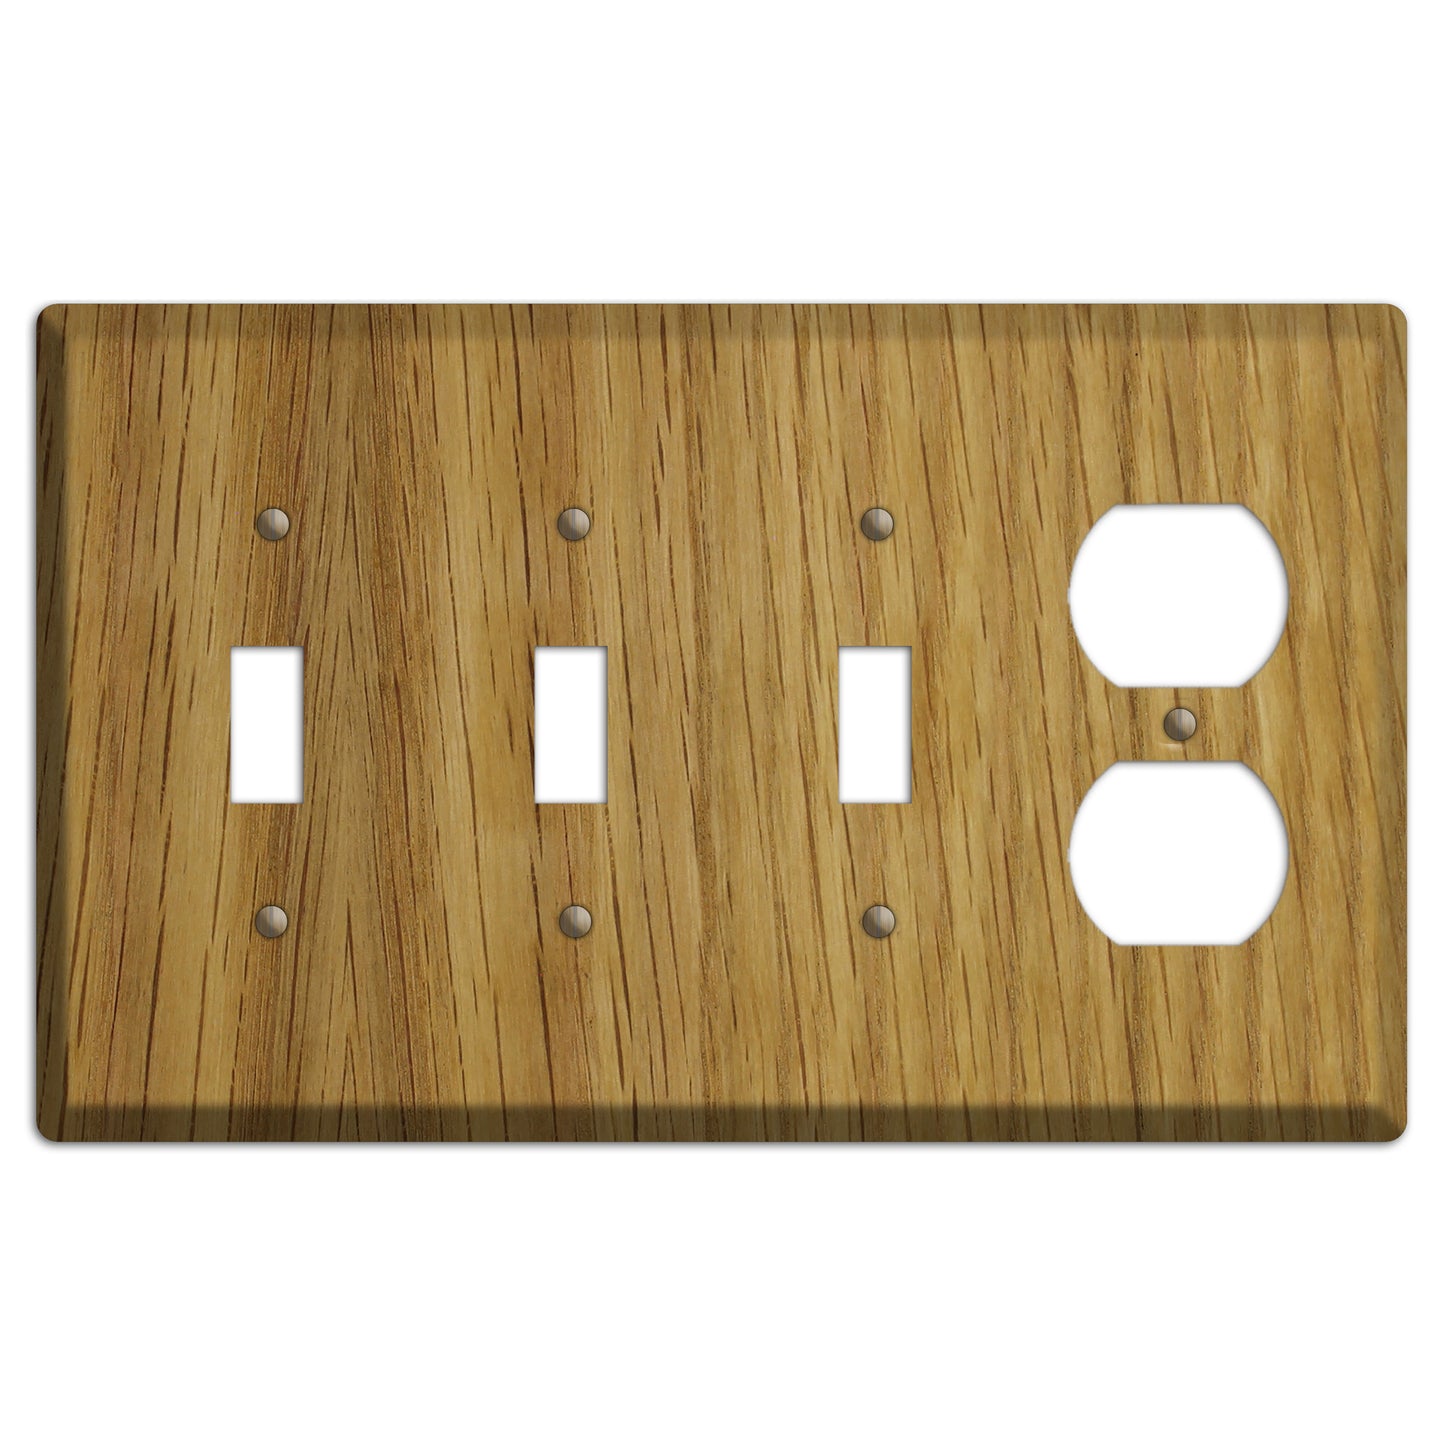 Unfinished White Oak Wood 3 Toggle / Duplex Outlet Cover Plate